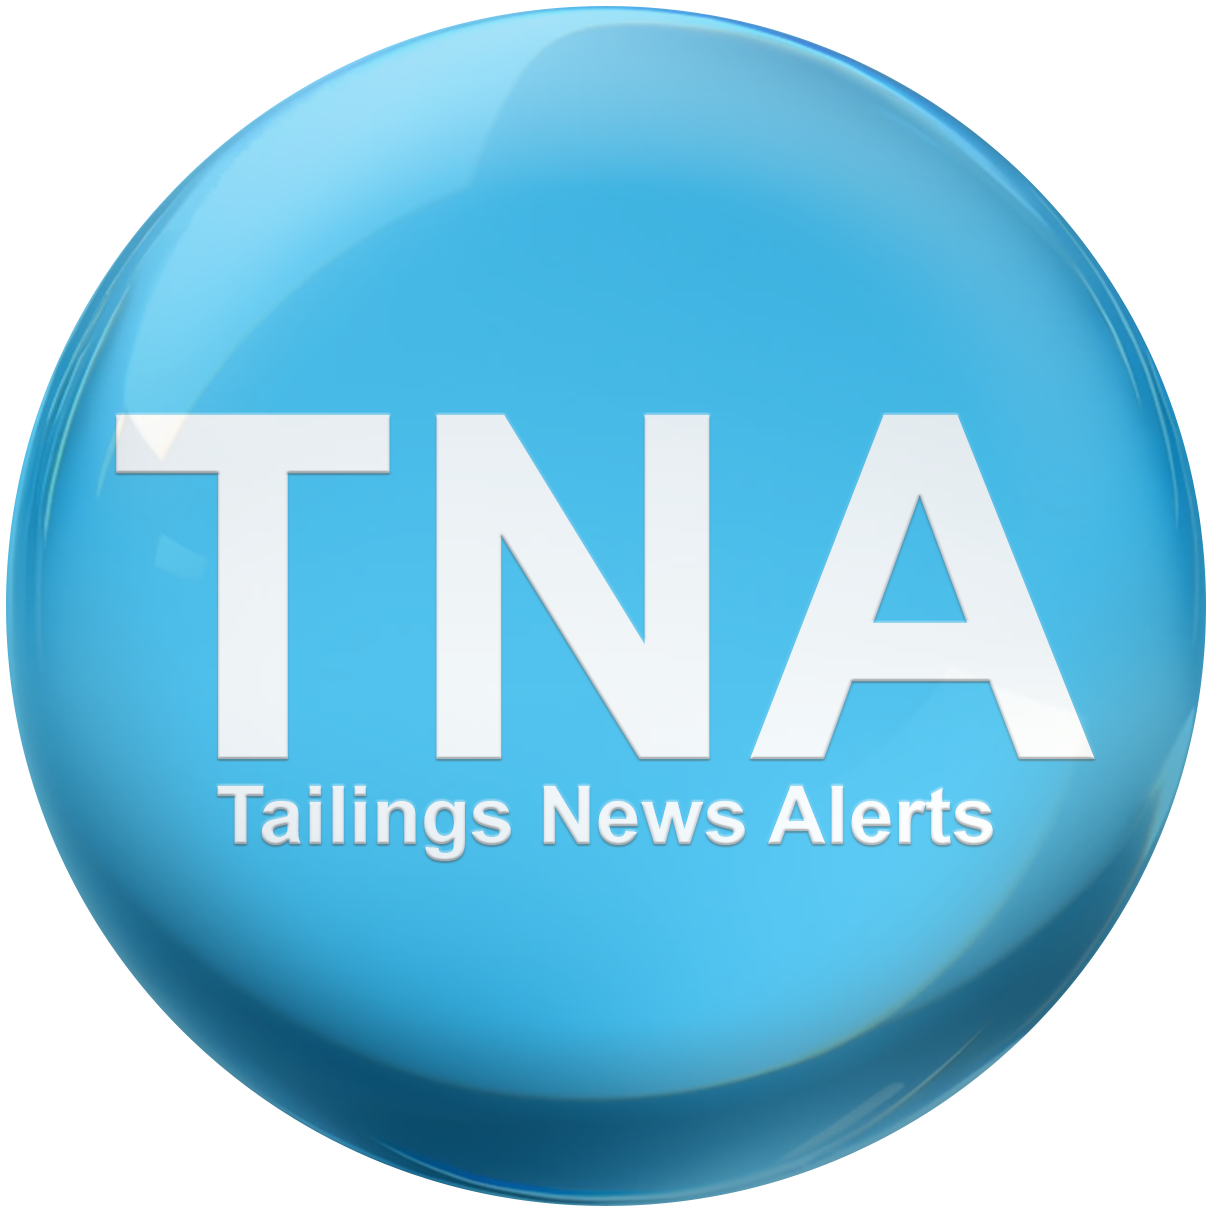 Tailings News Alerts